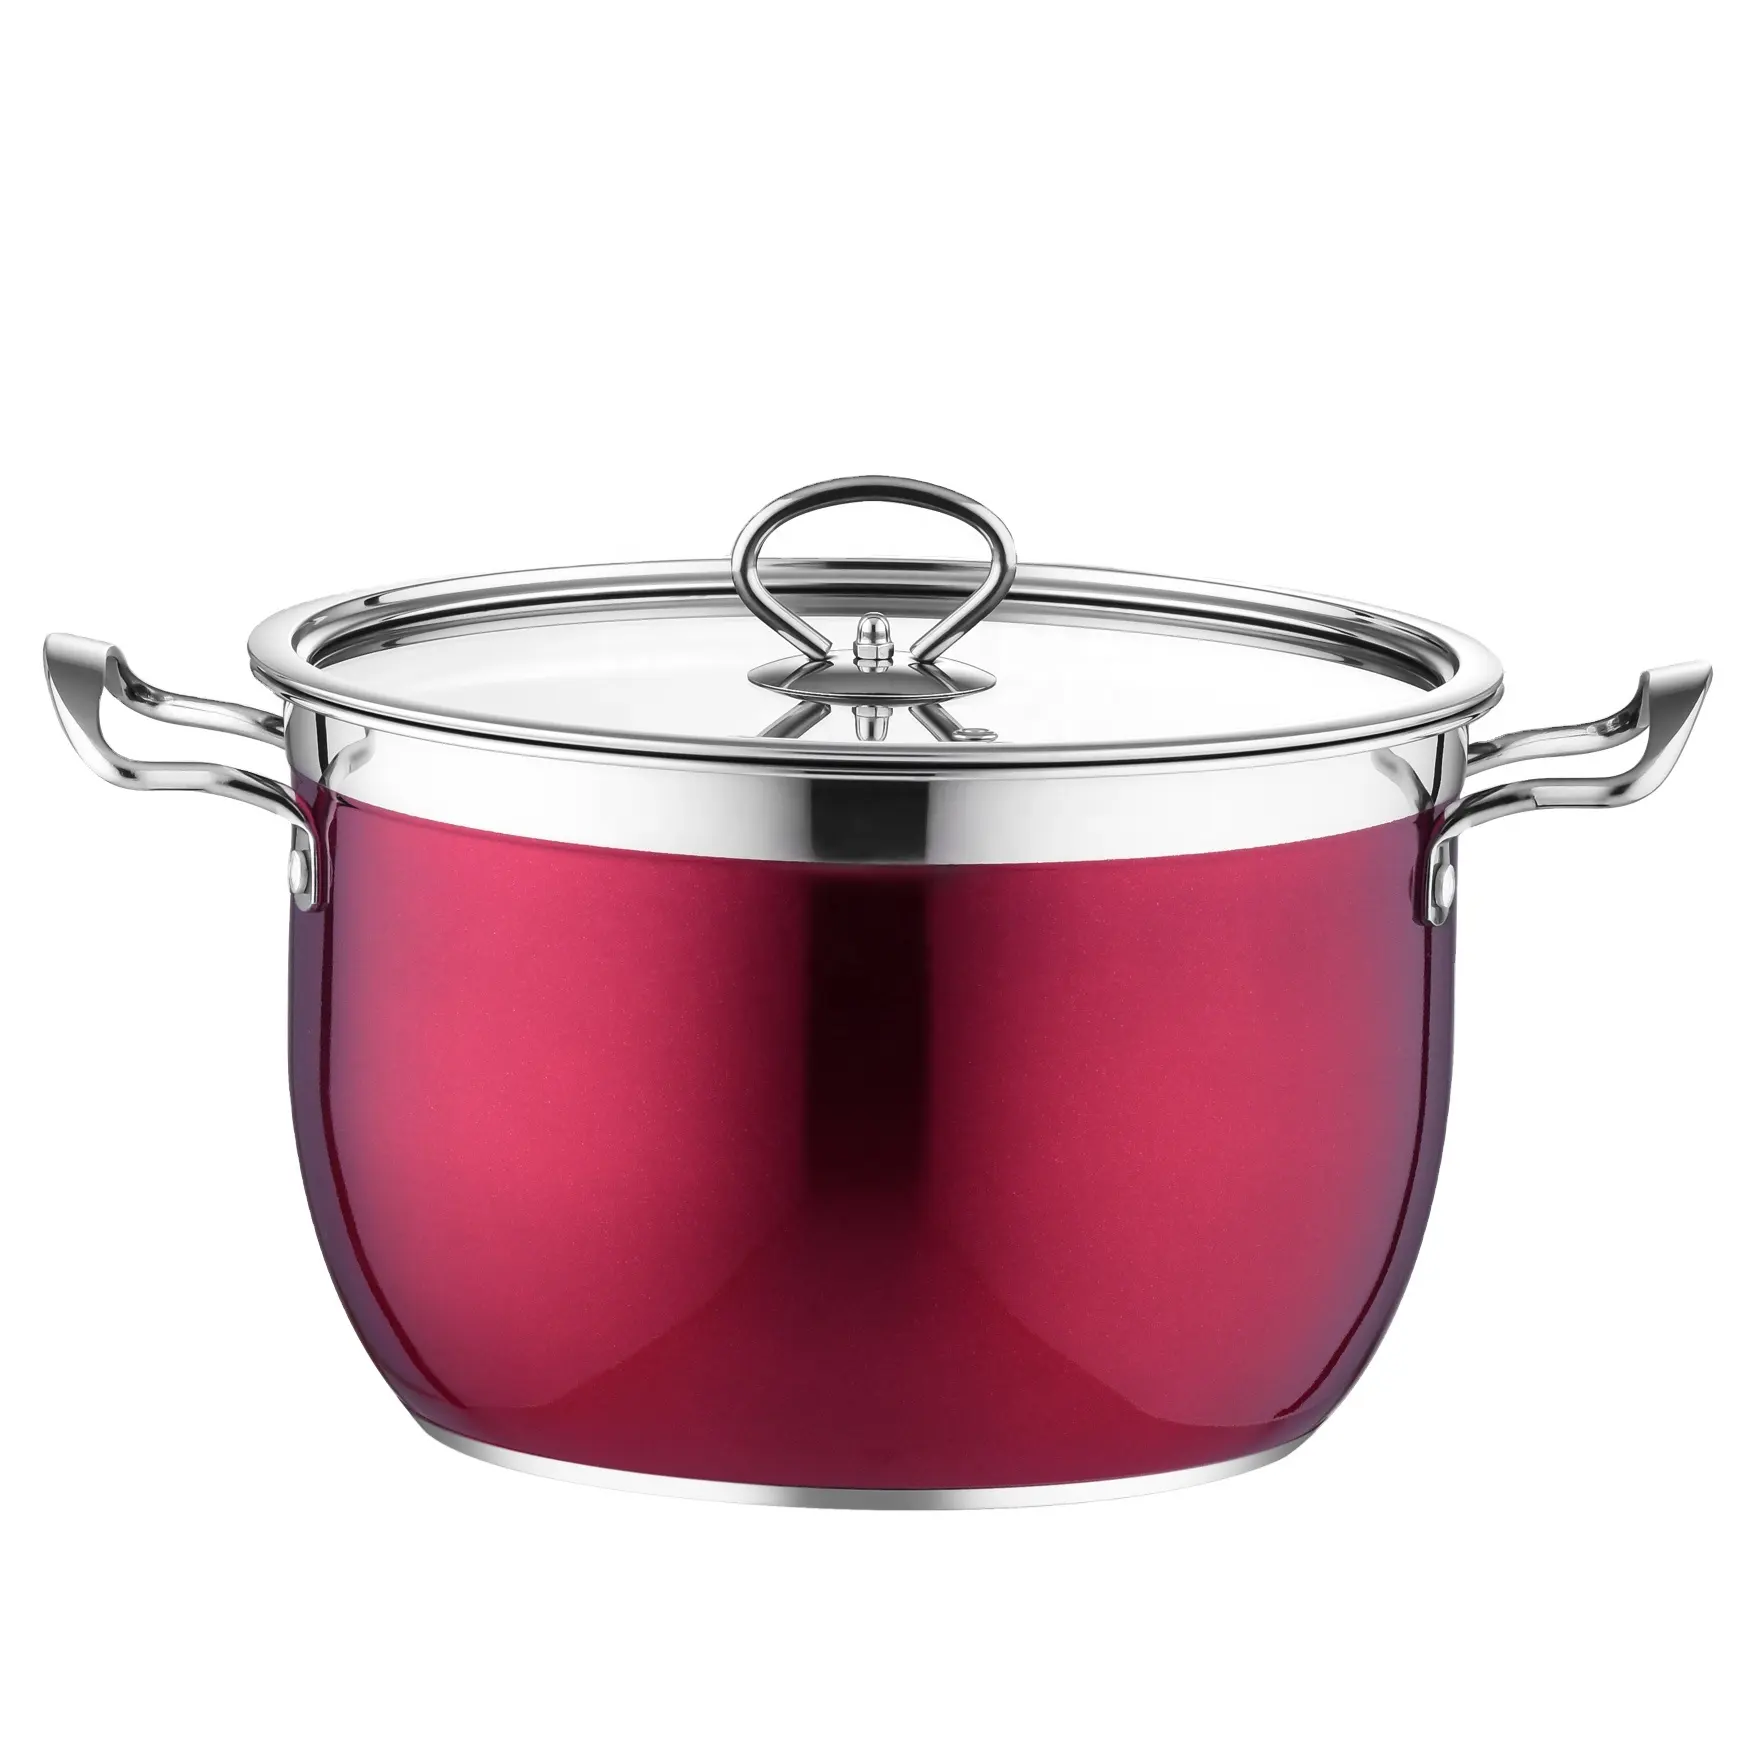 Hot selling 201 big size 24 CM commercial stainless steel cooking soup pot with glass cover for home kitchen cook